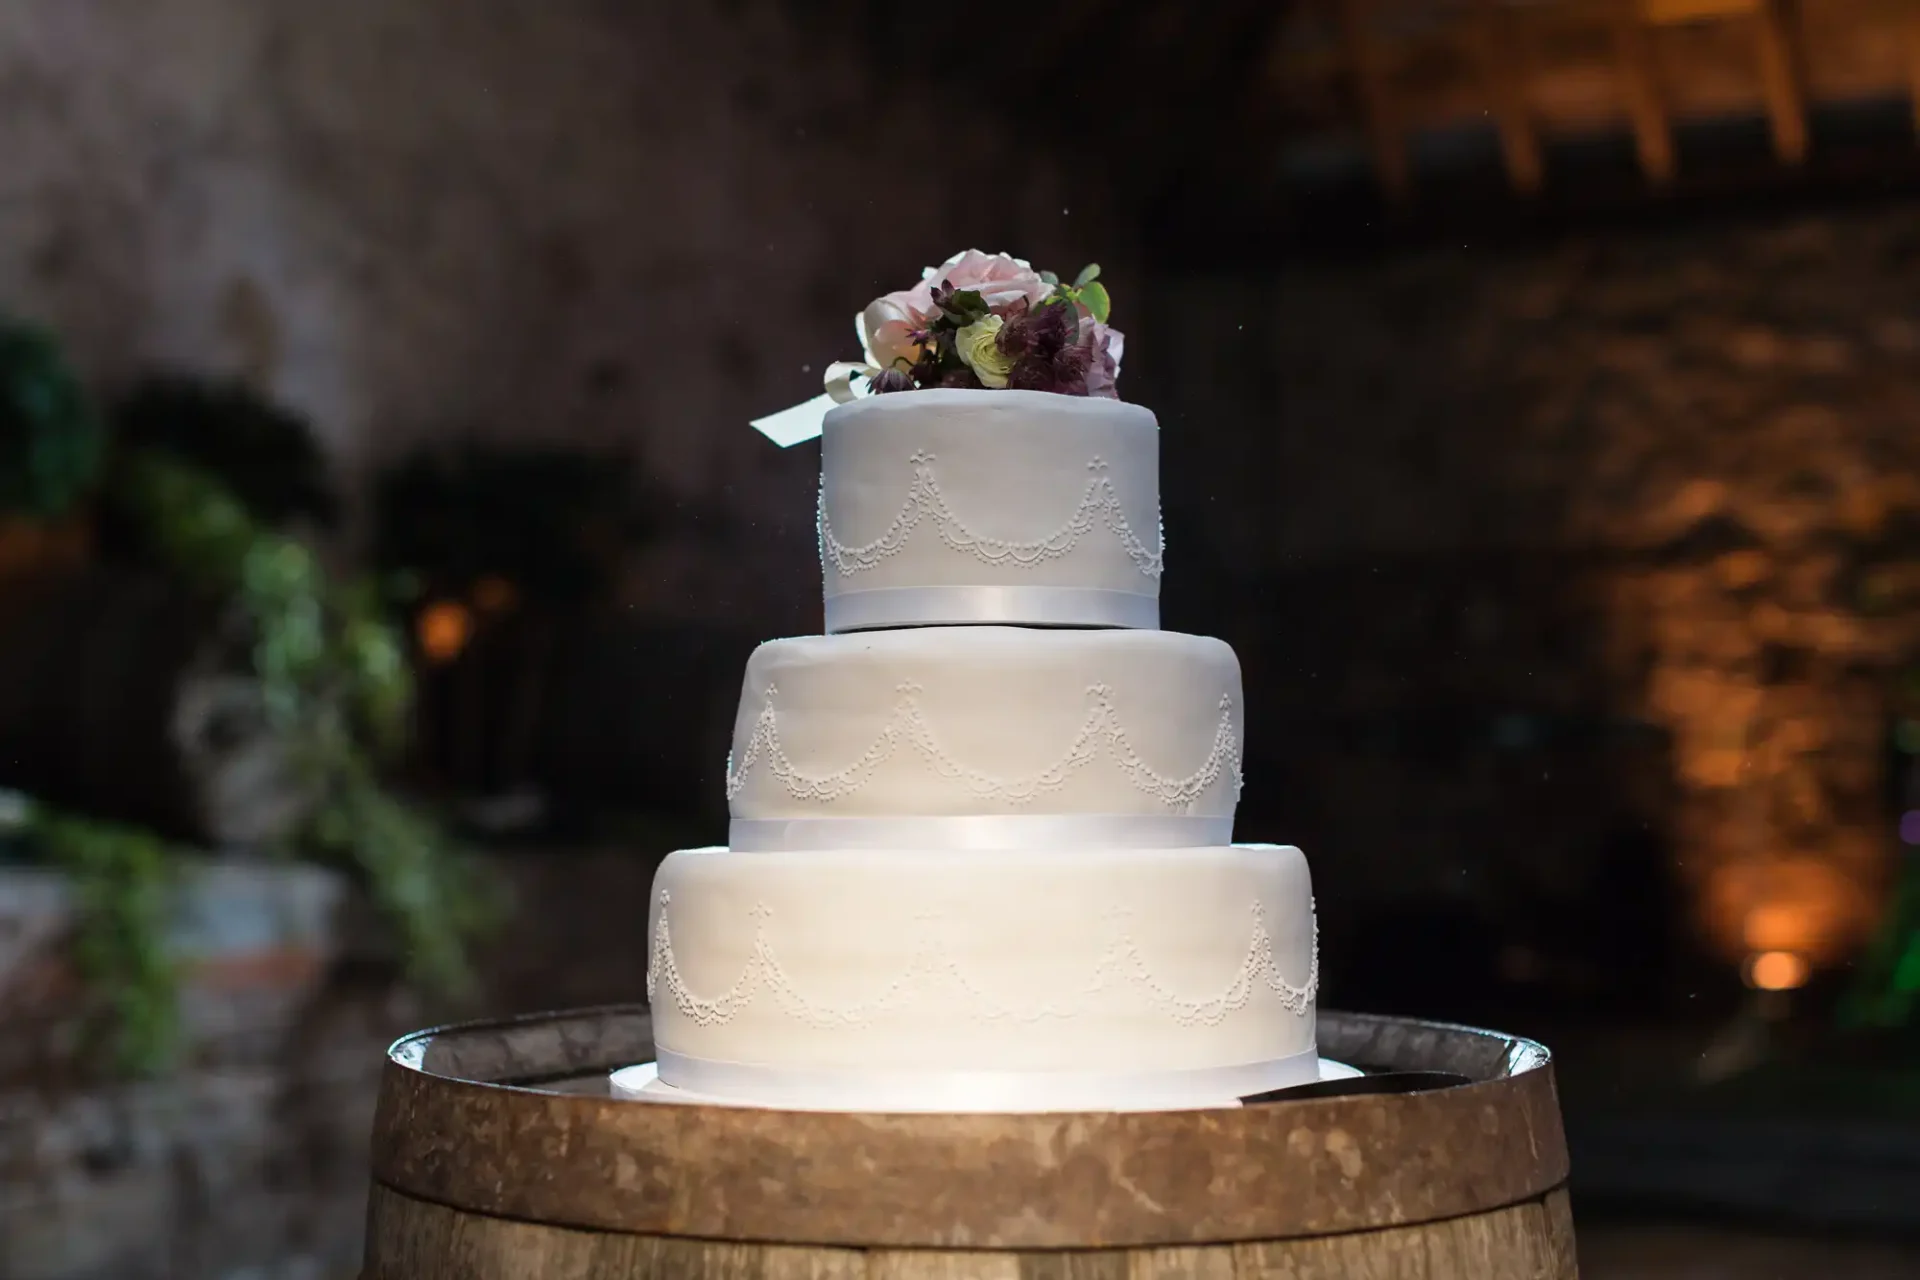 Three-tiered wedding cake with white icing and floral decoration on top, displayed on a wooden barrel in a dimly lit setting.